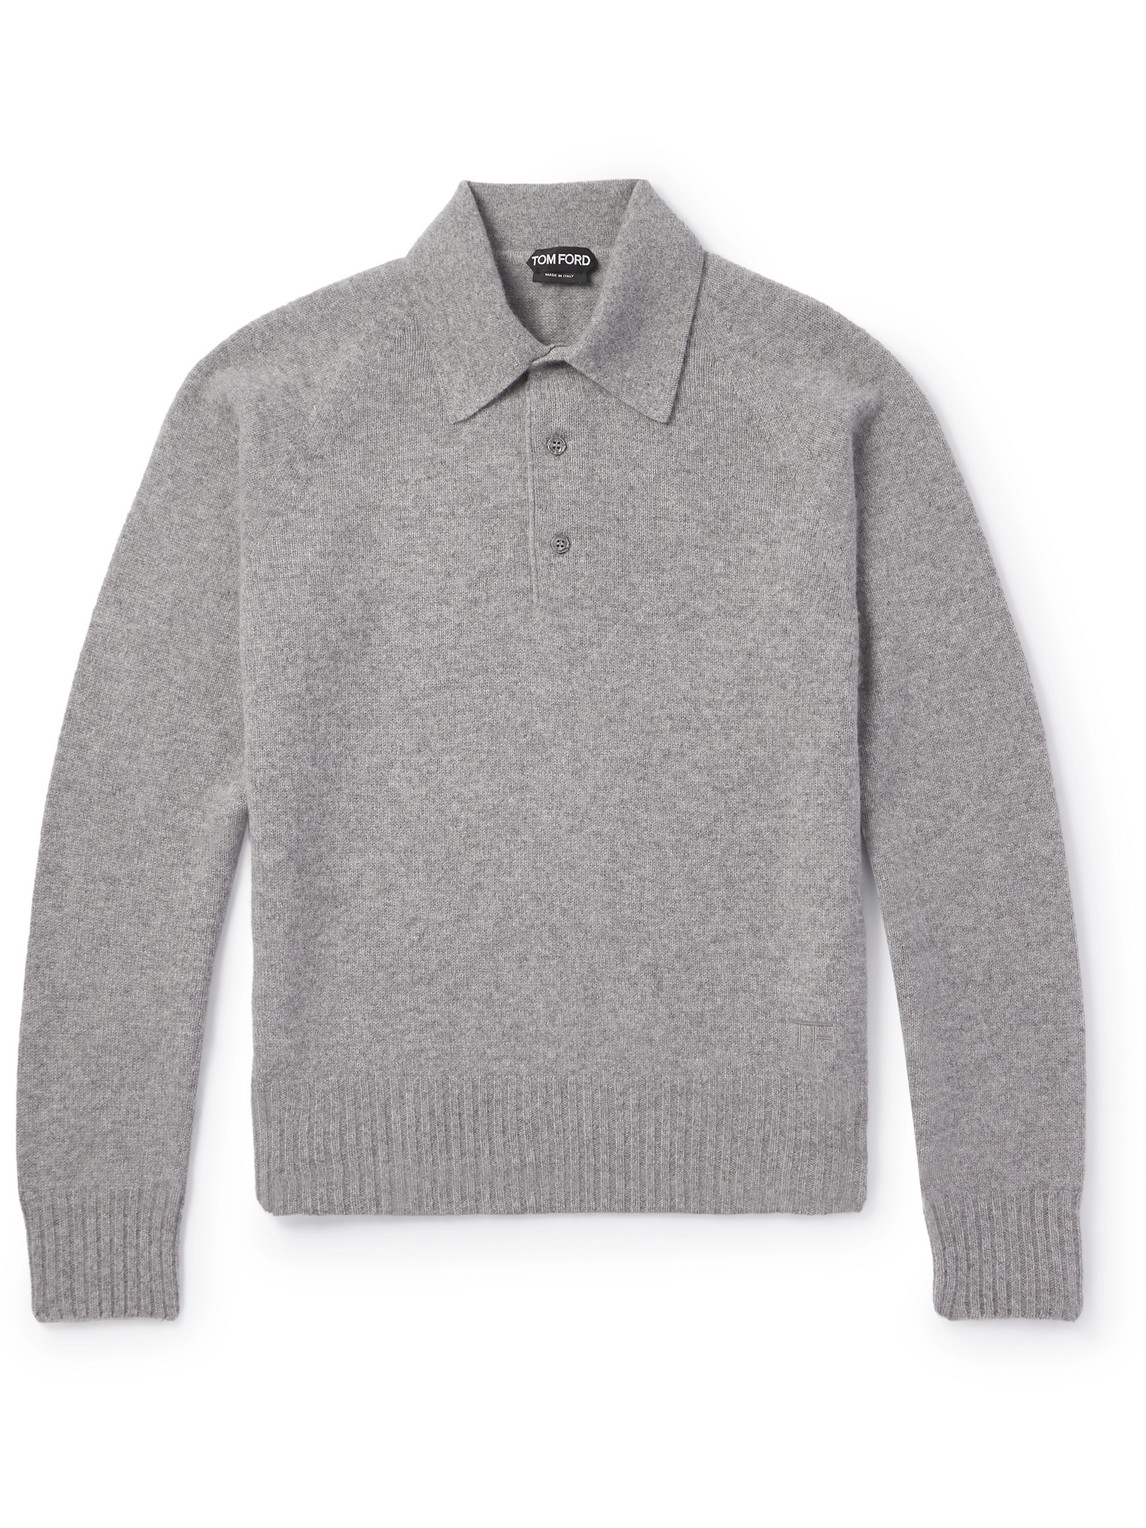 TOM FORD - Brushed Cashmere Polo Shirt - Men - Gray - IT 46 von TOM FORD